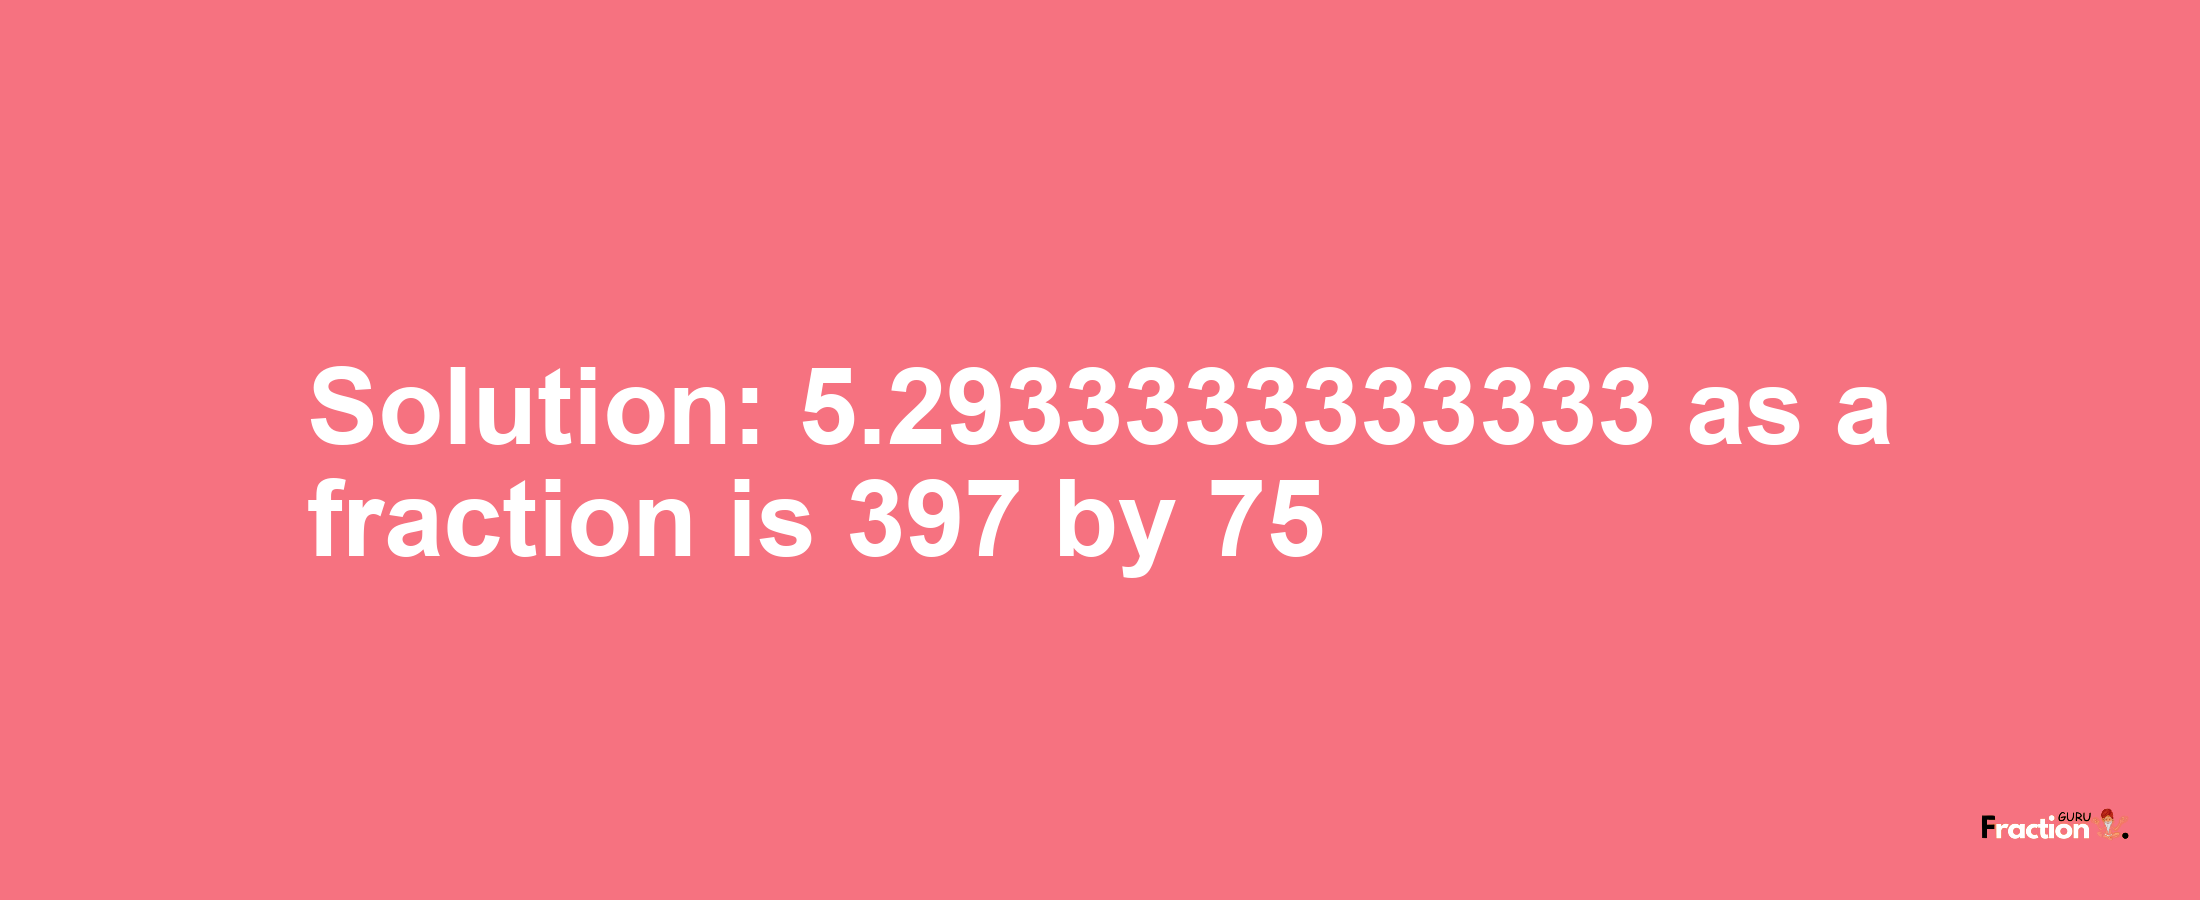 Solution:5.2933333333333 as a fraction is 397/75